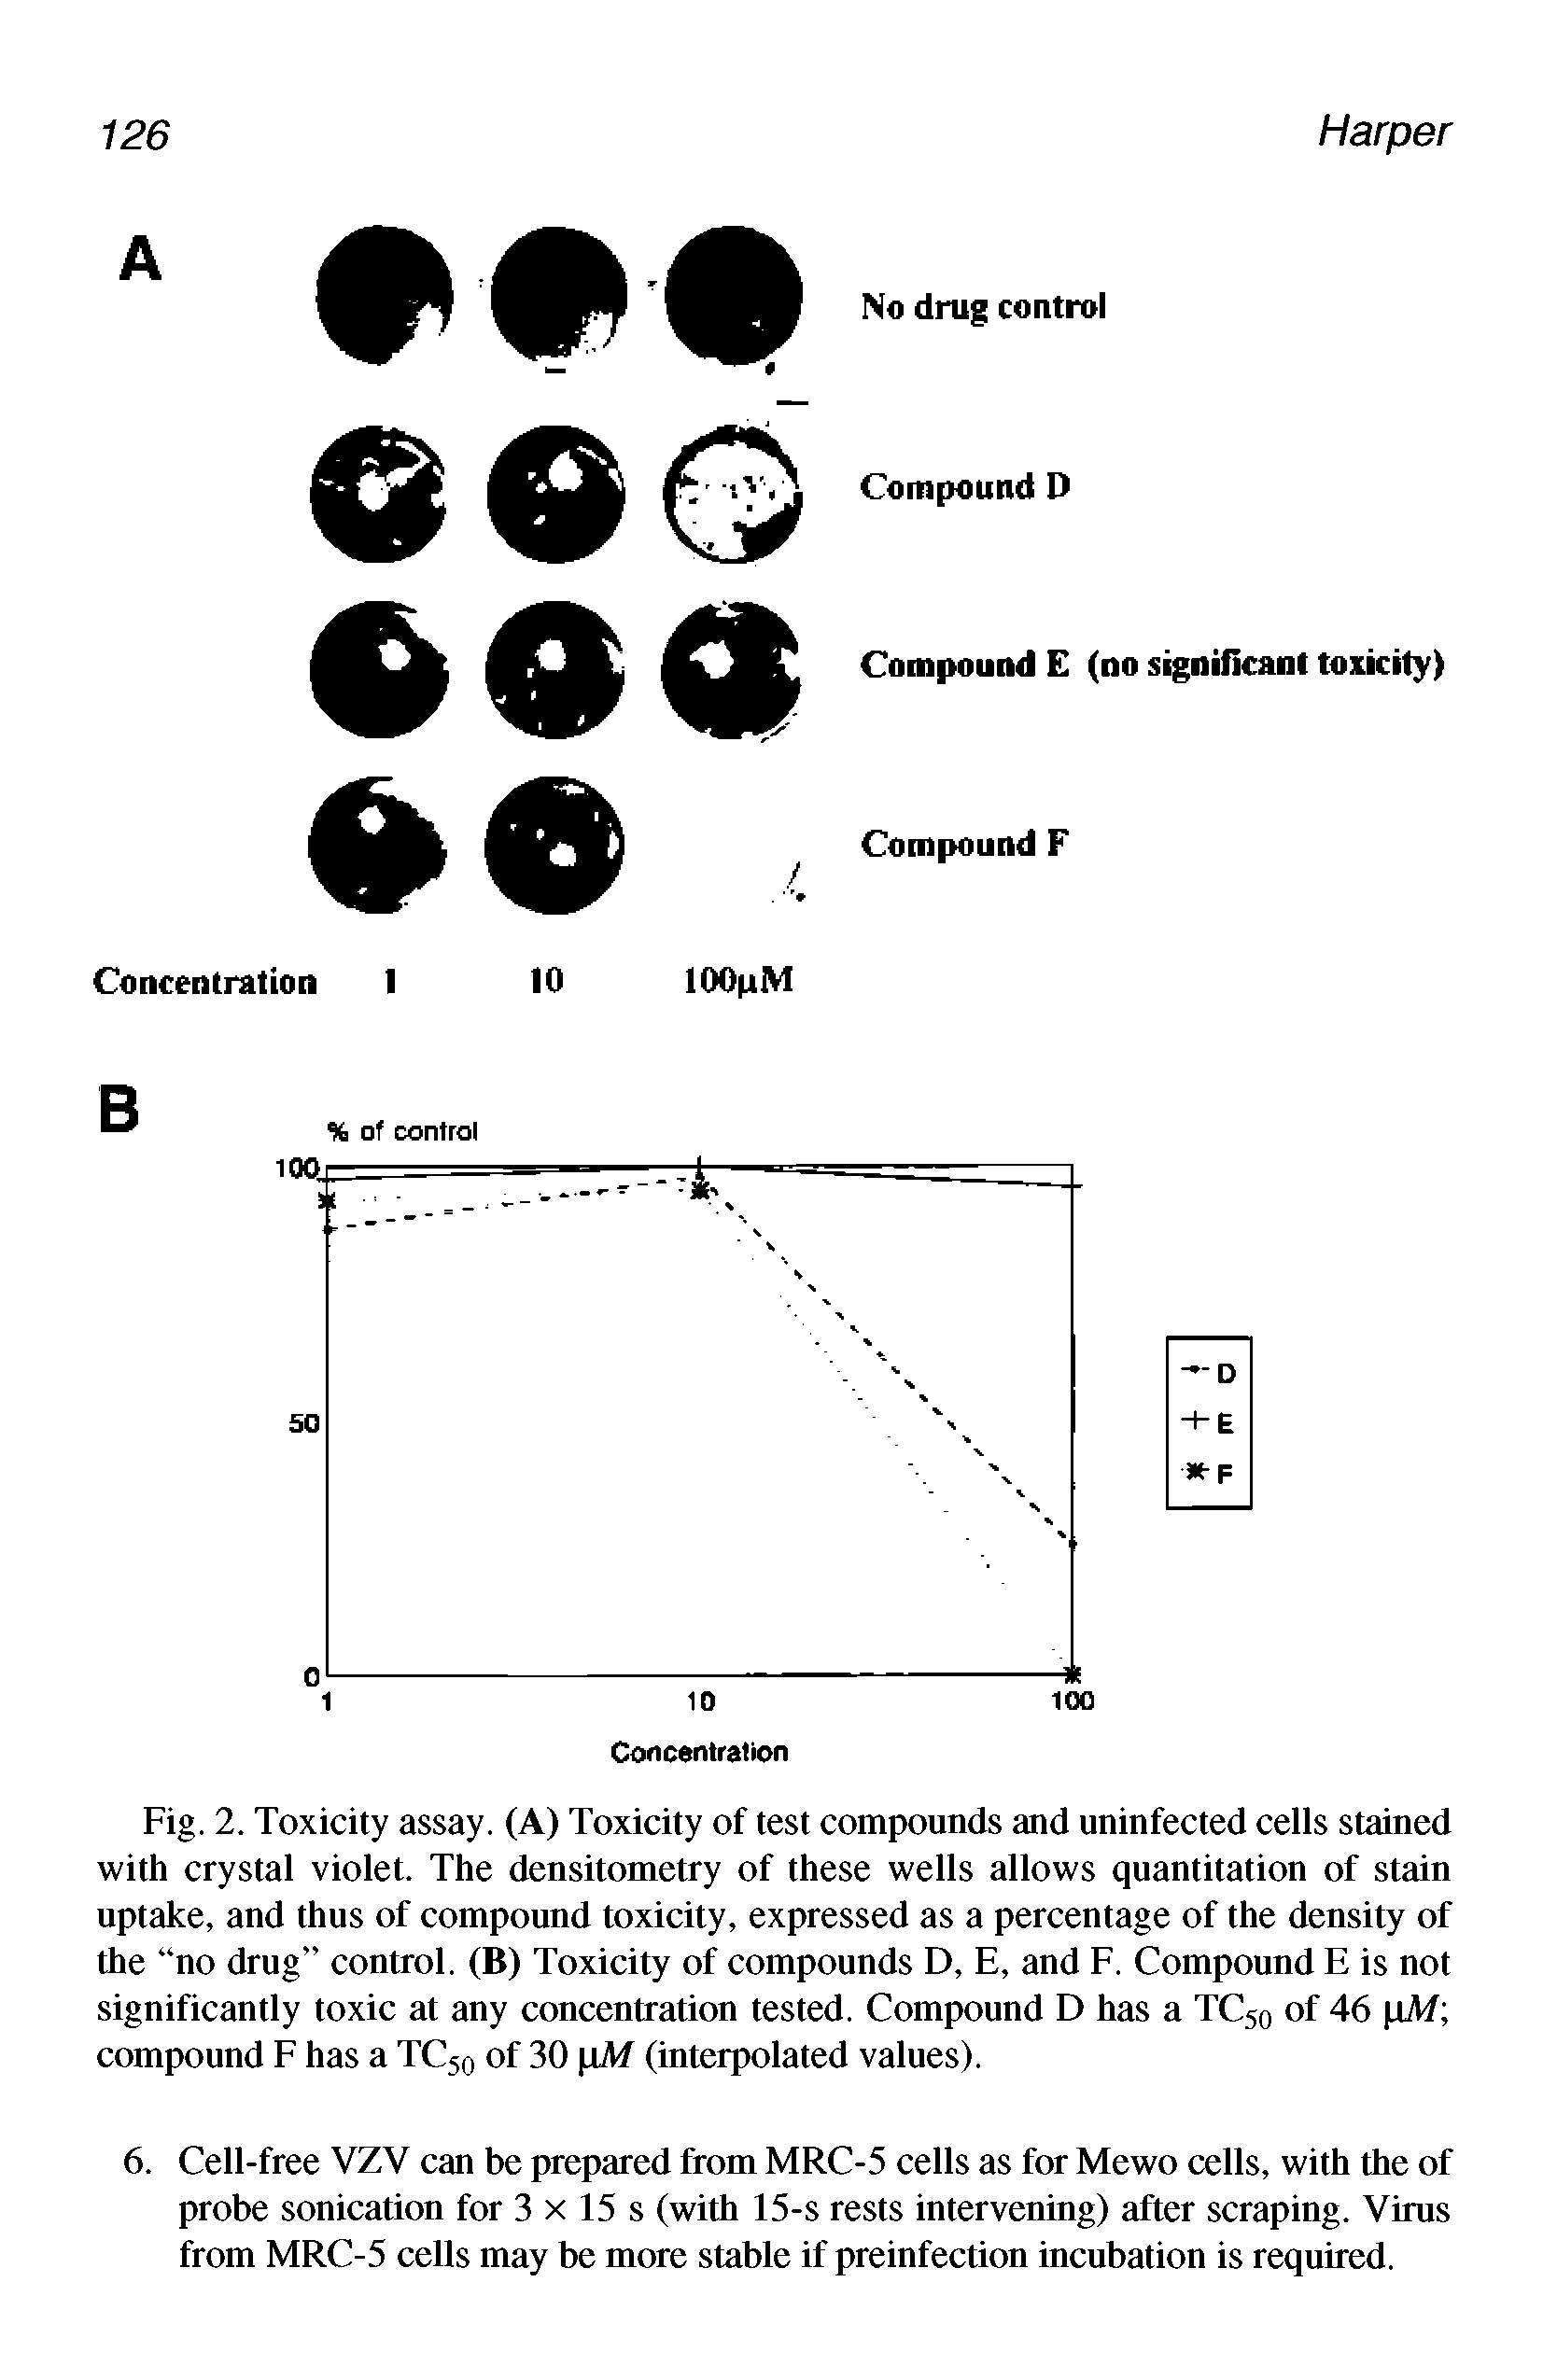 Fig. 2. Toxicity assay. (A) Toxicity of test compounds and uninfected cells stained with crystal violet. The densitometry of these wells allows quantitation of stain uptake, and thus of compound toxicity, expressed as a percentage of the density of the no drug control. (B) Toxicity of compounds D, E, and F. Compound E is not significantly toxic at any concentration tested. Compound D has a TC50 of 46 pM compound F has a TC50 of 30 pM (interpolated values).